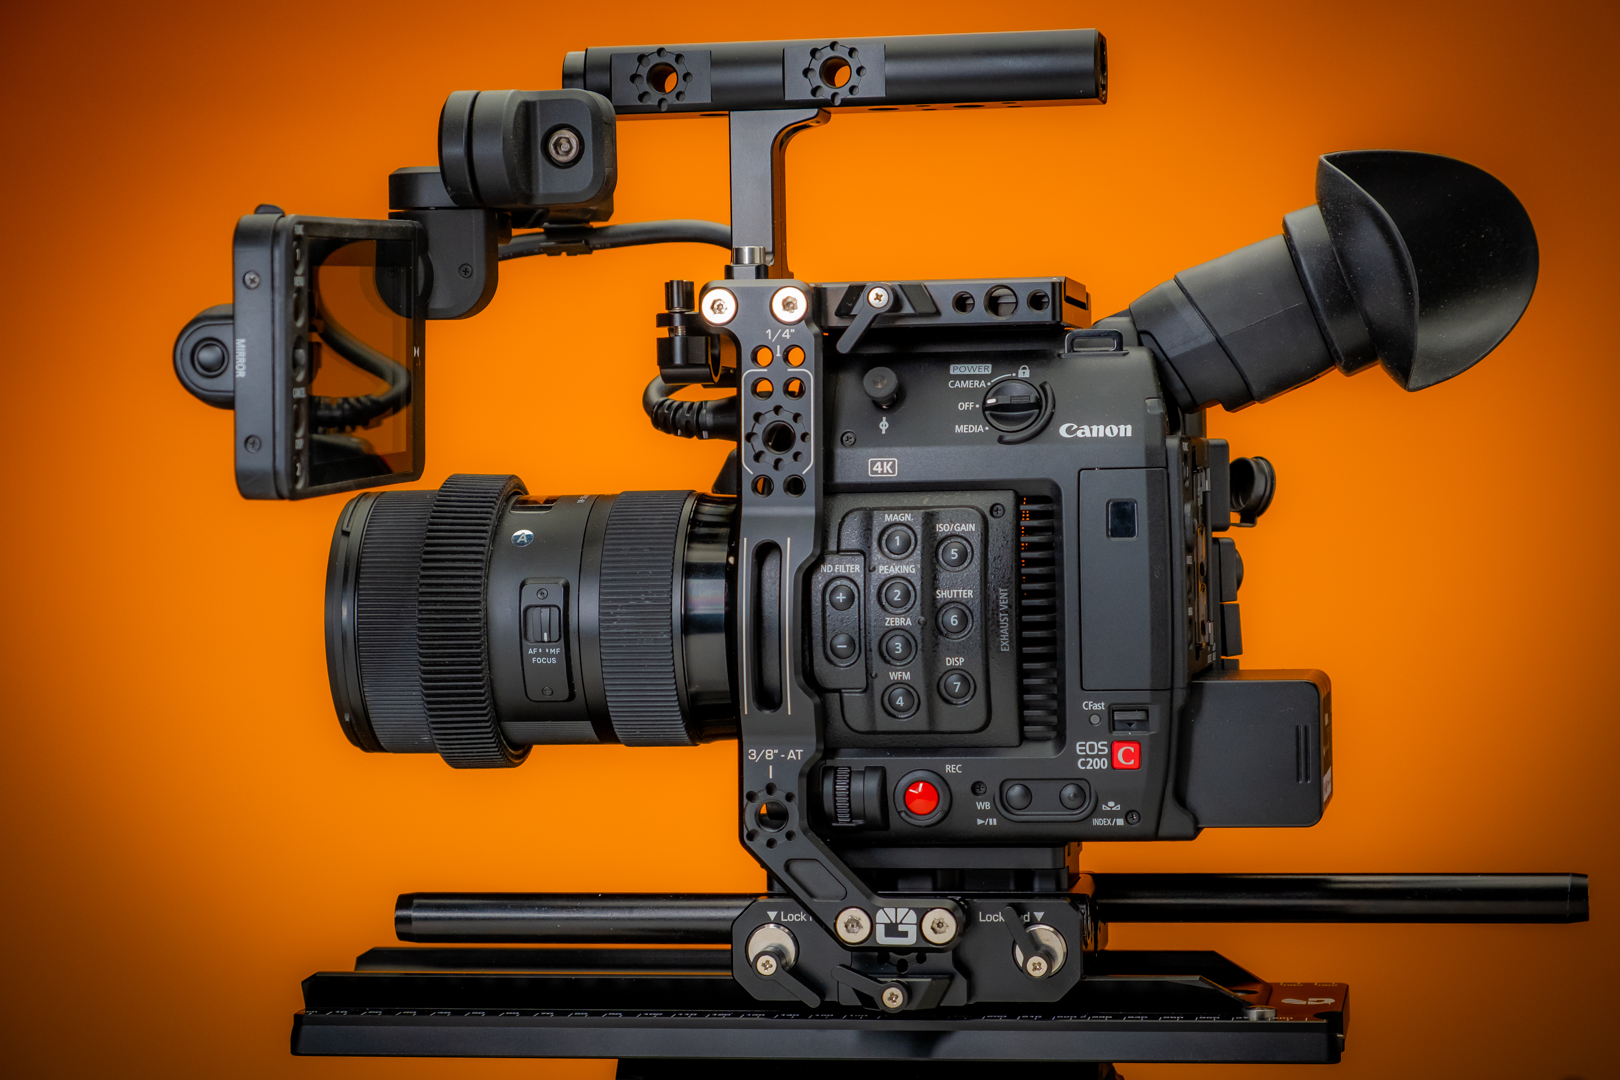 Hands On With The Bright Tangerine Left Field Canon C200 Cage